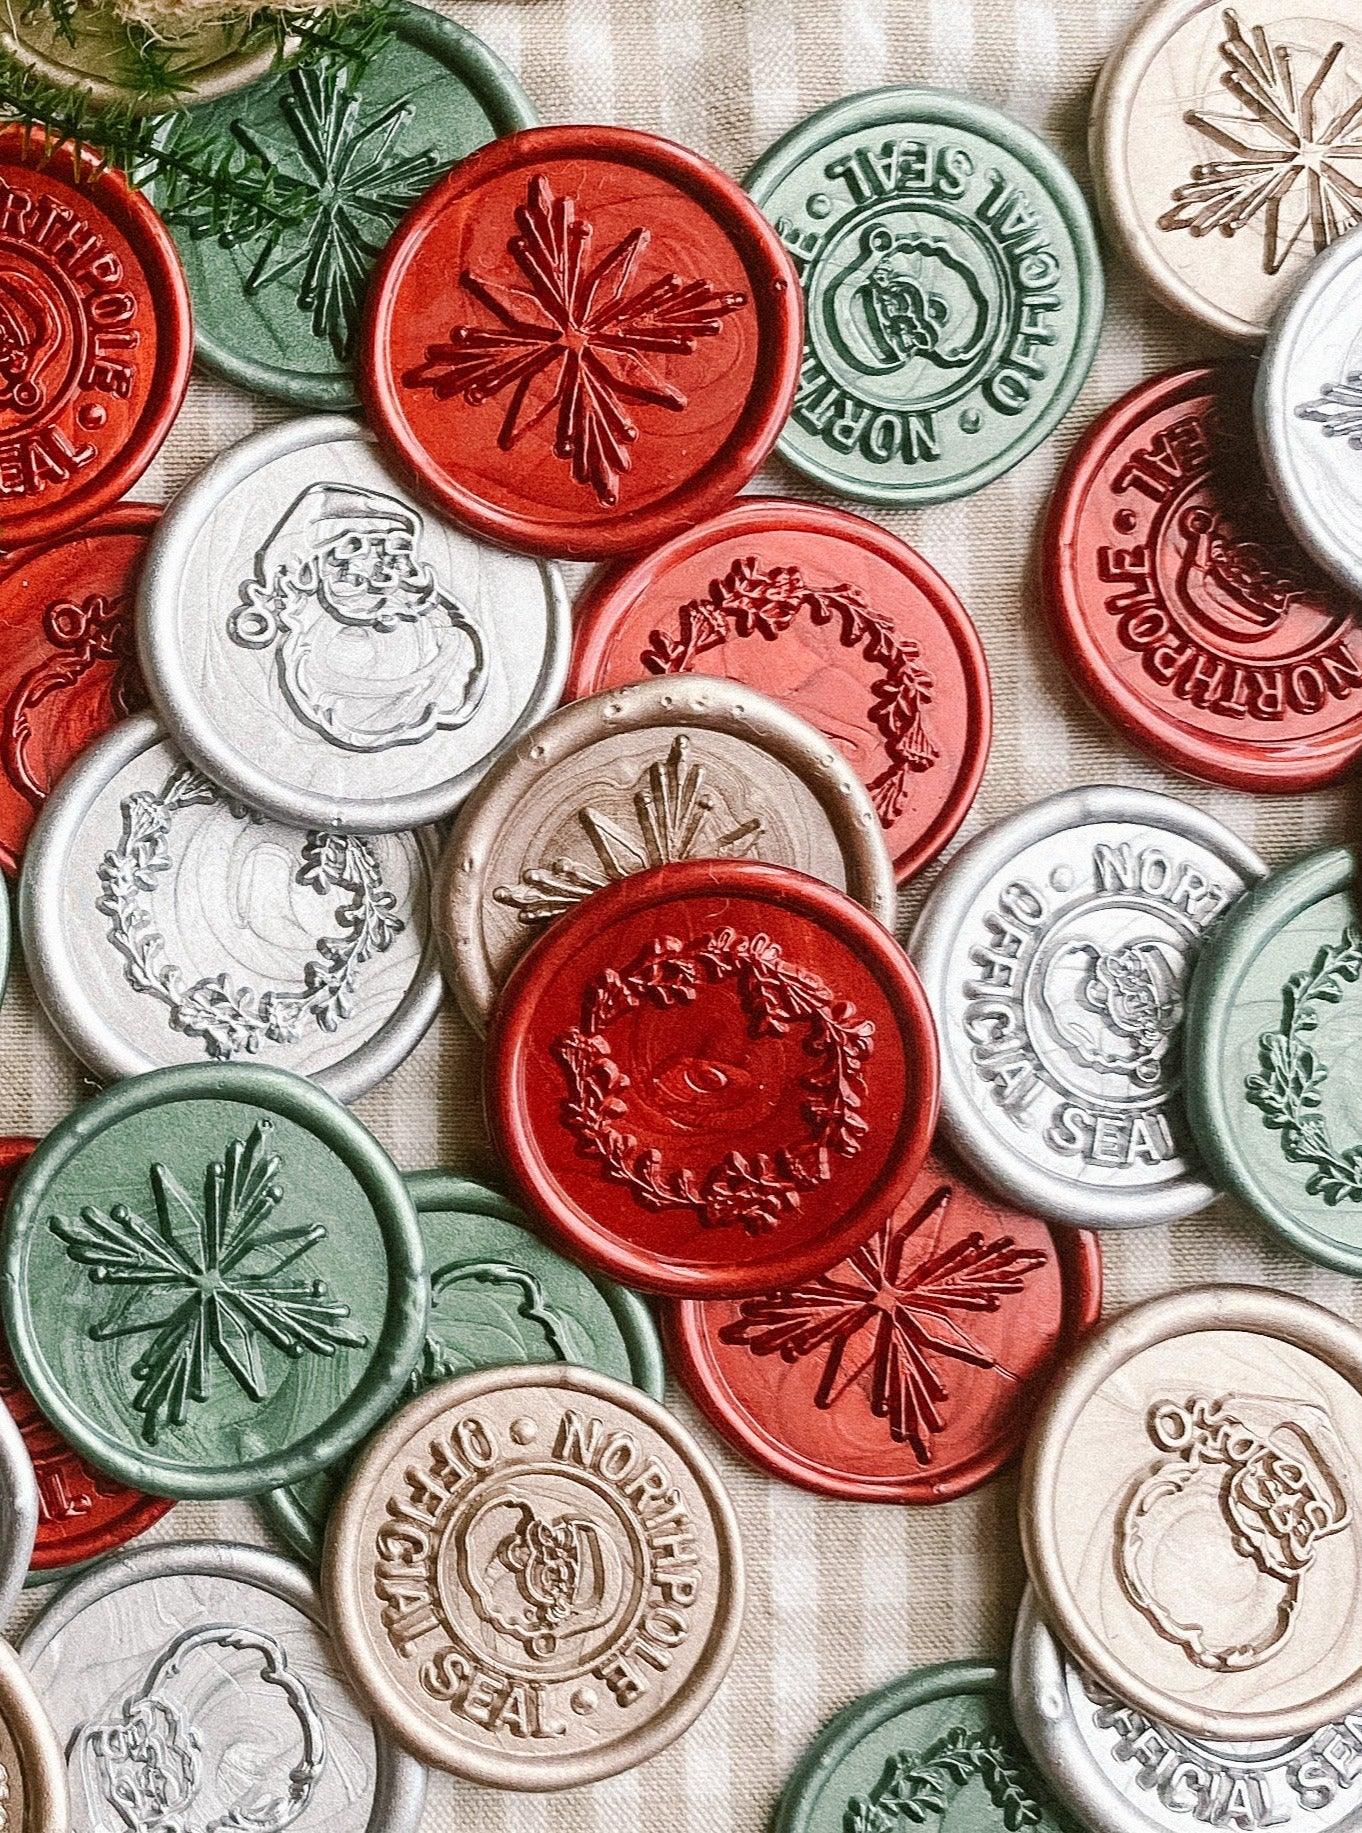 Holiday wax seals - Set of 9 - Made of Honour Co.